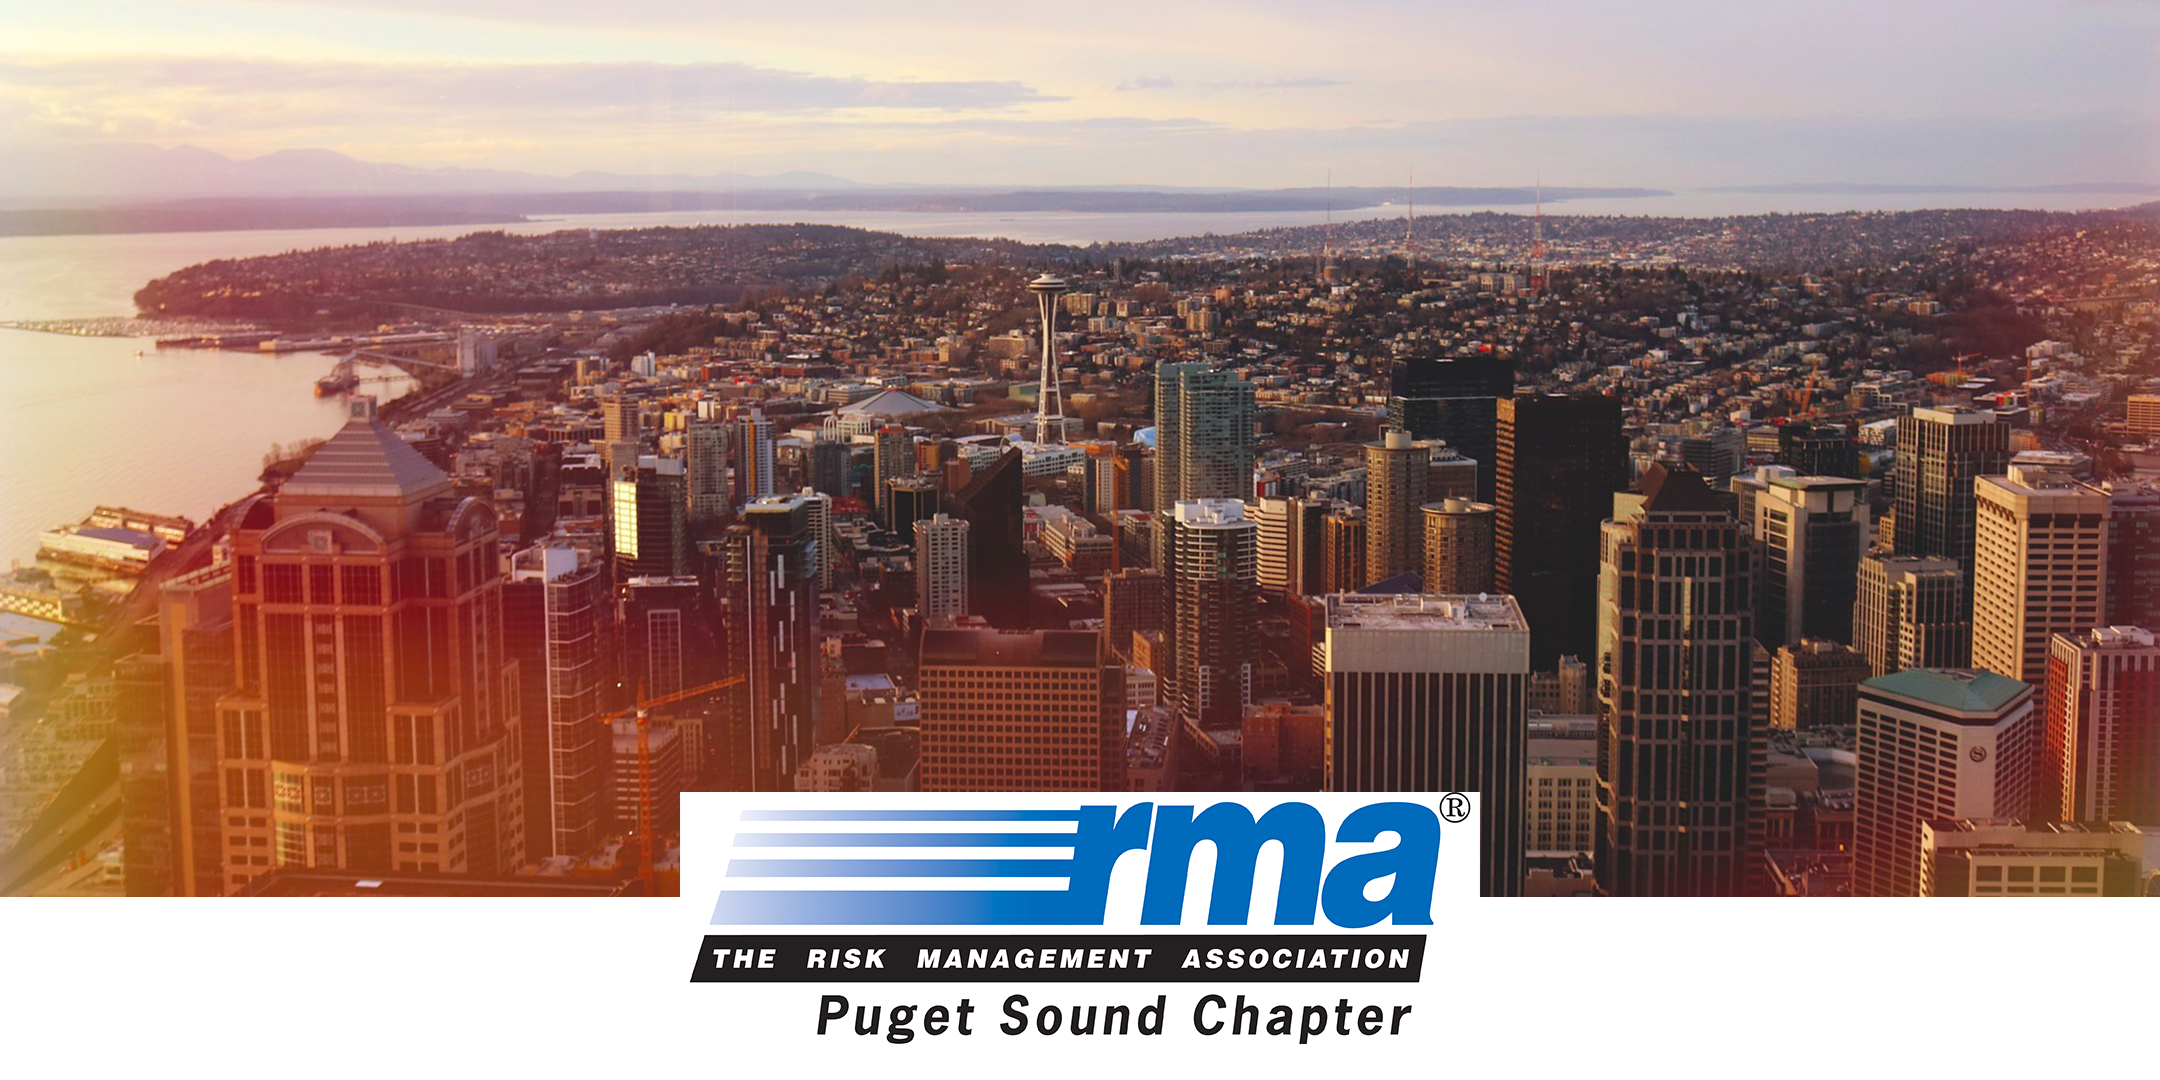 RMA Puget Sound: Thriving in an Era of Digital Disruption with JP Nicols